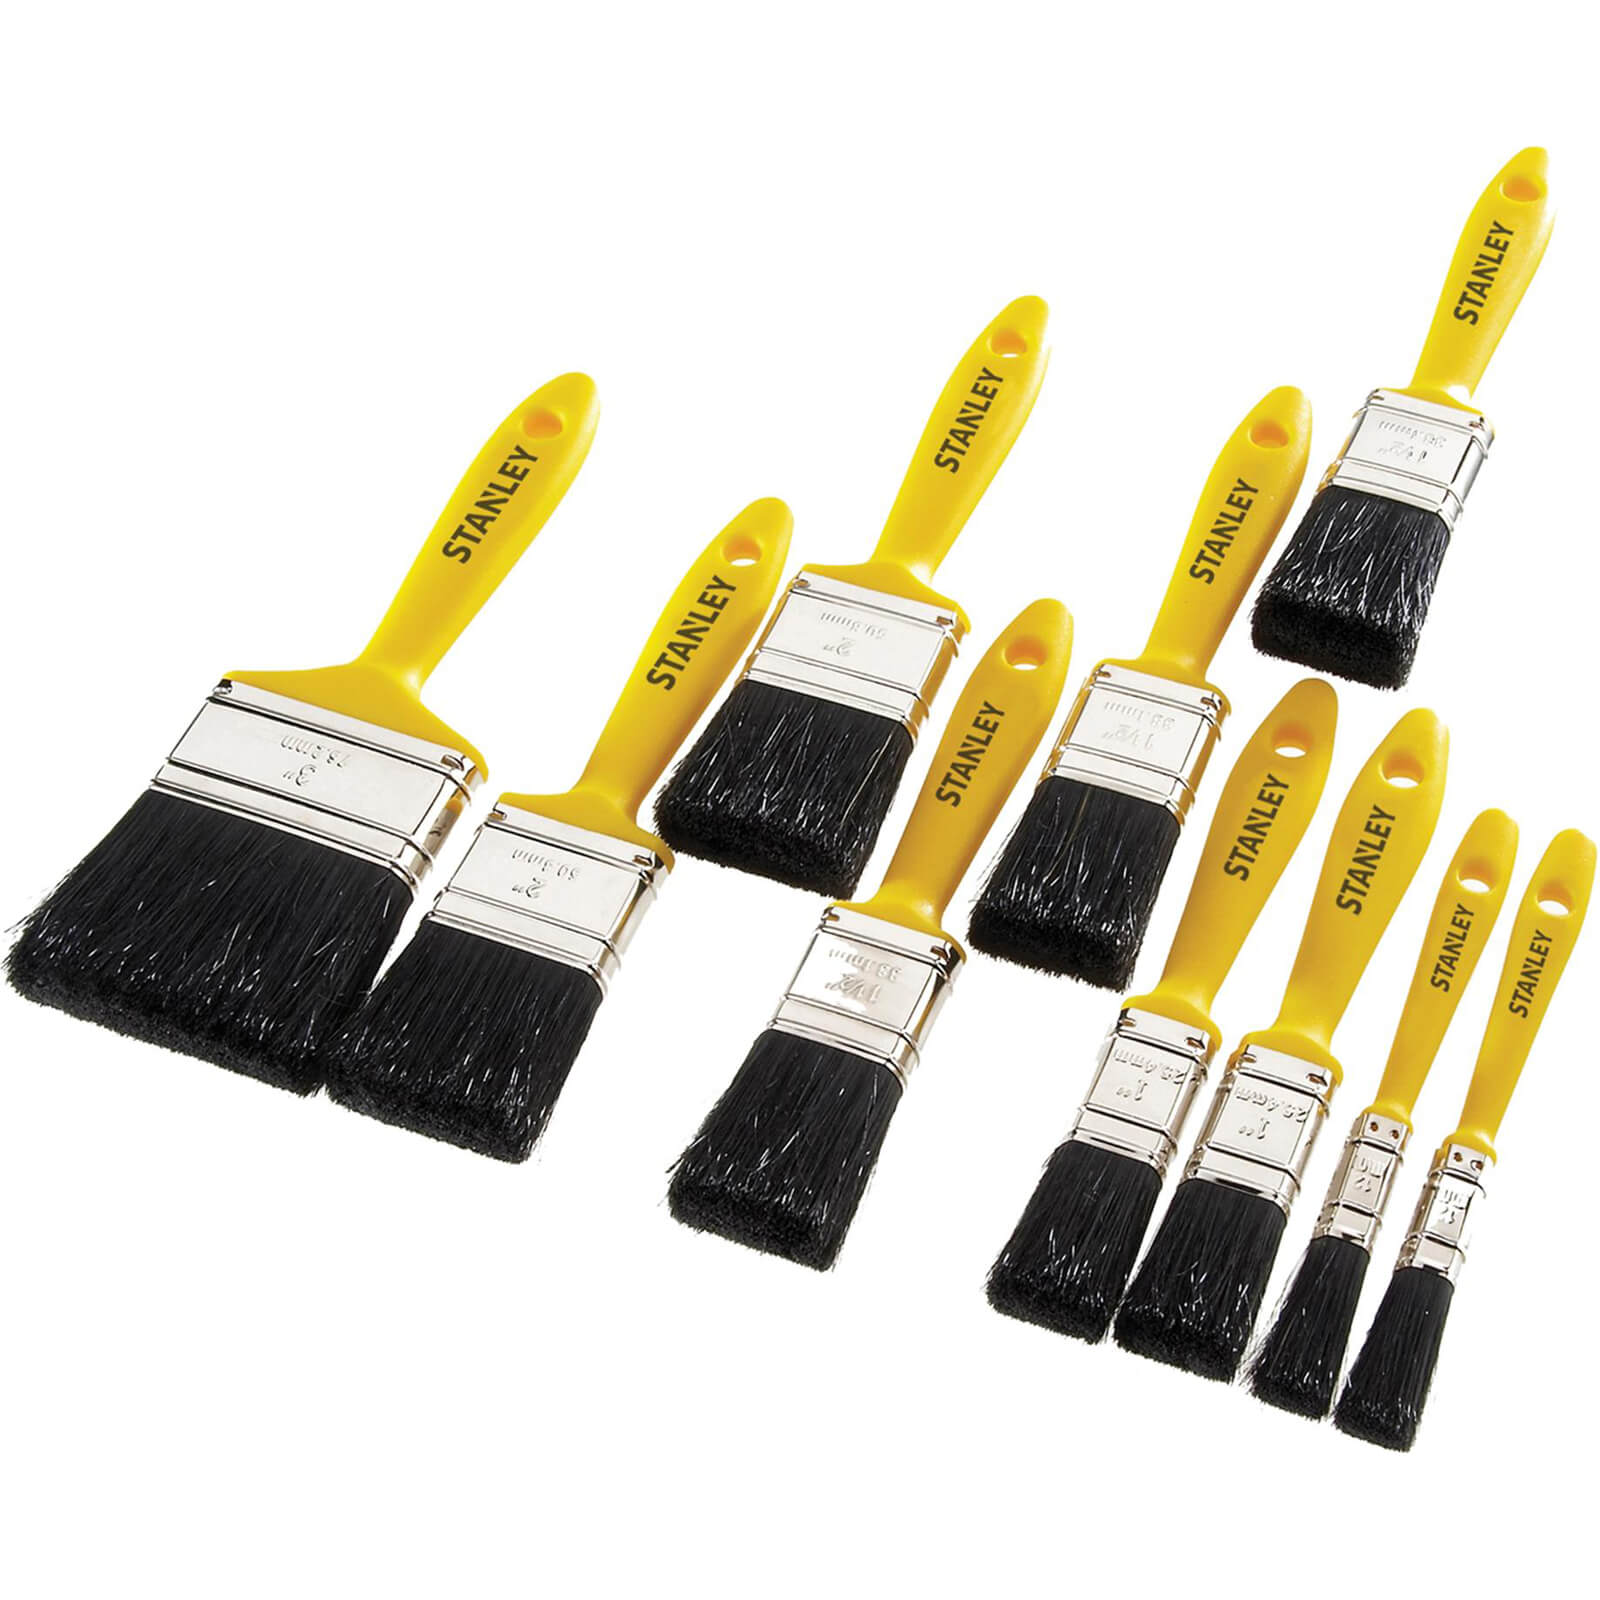 Photos - Putty Knife / Painting Tool Stanley 10 Piece Hobby Paint Brush Set 